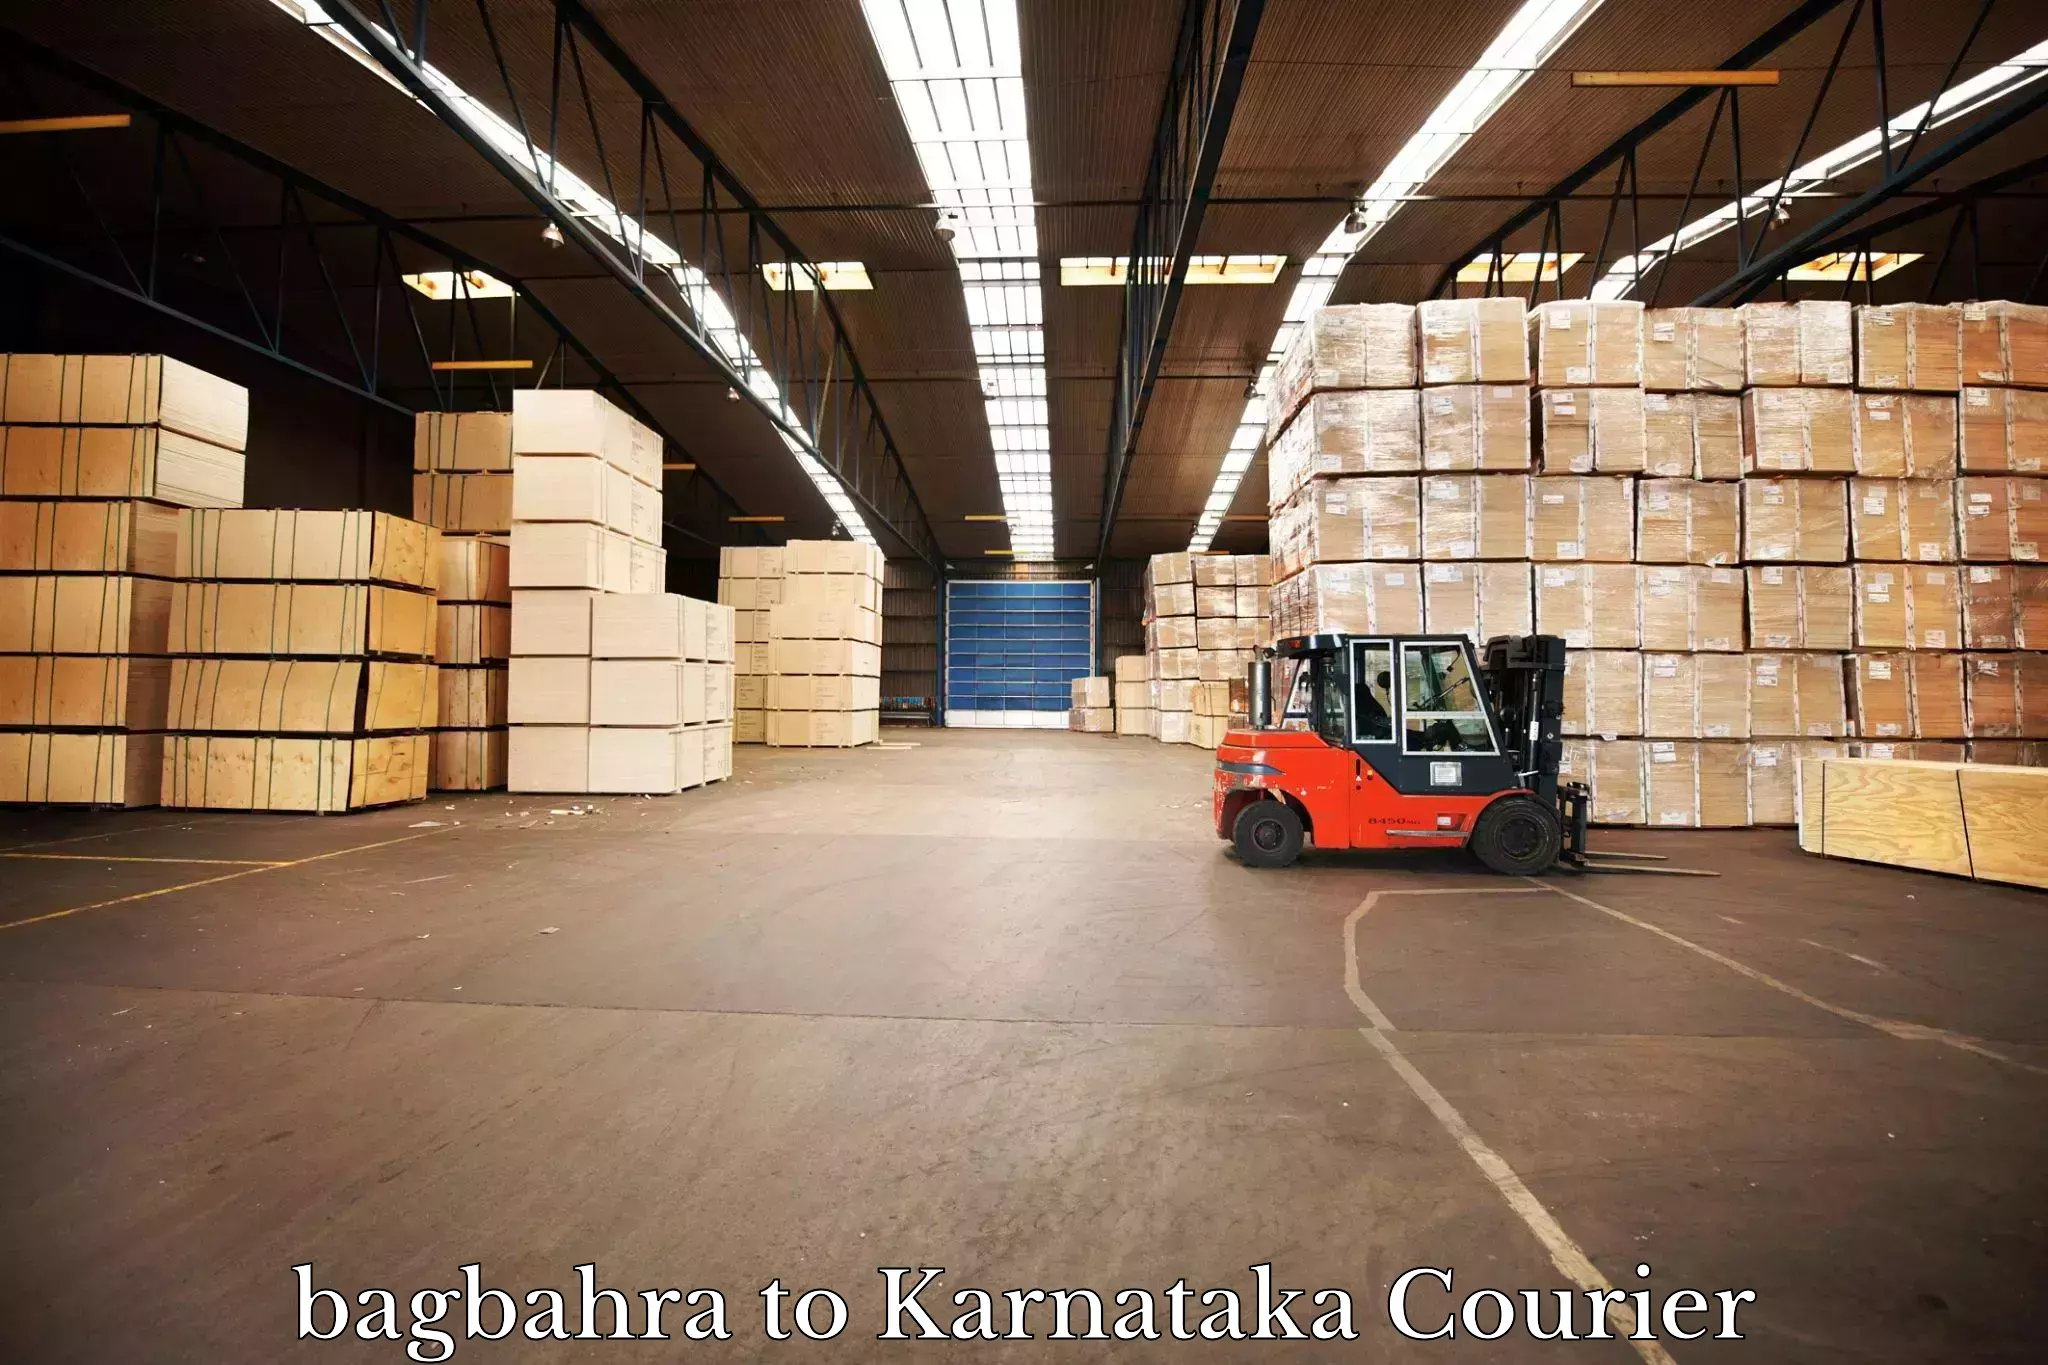 Courier service partnerships bagbahra to Anavatti